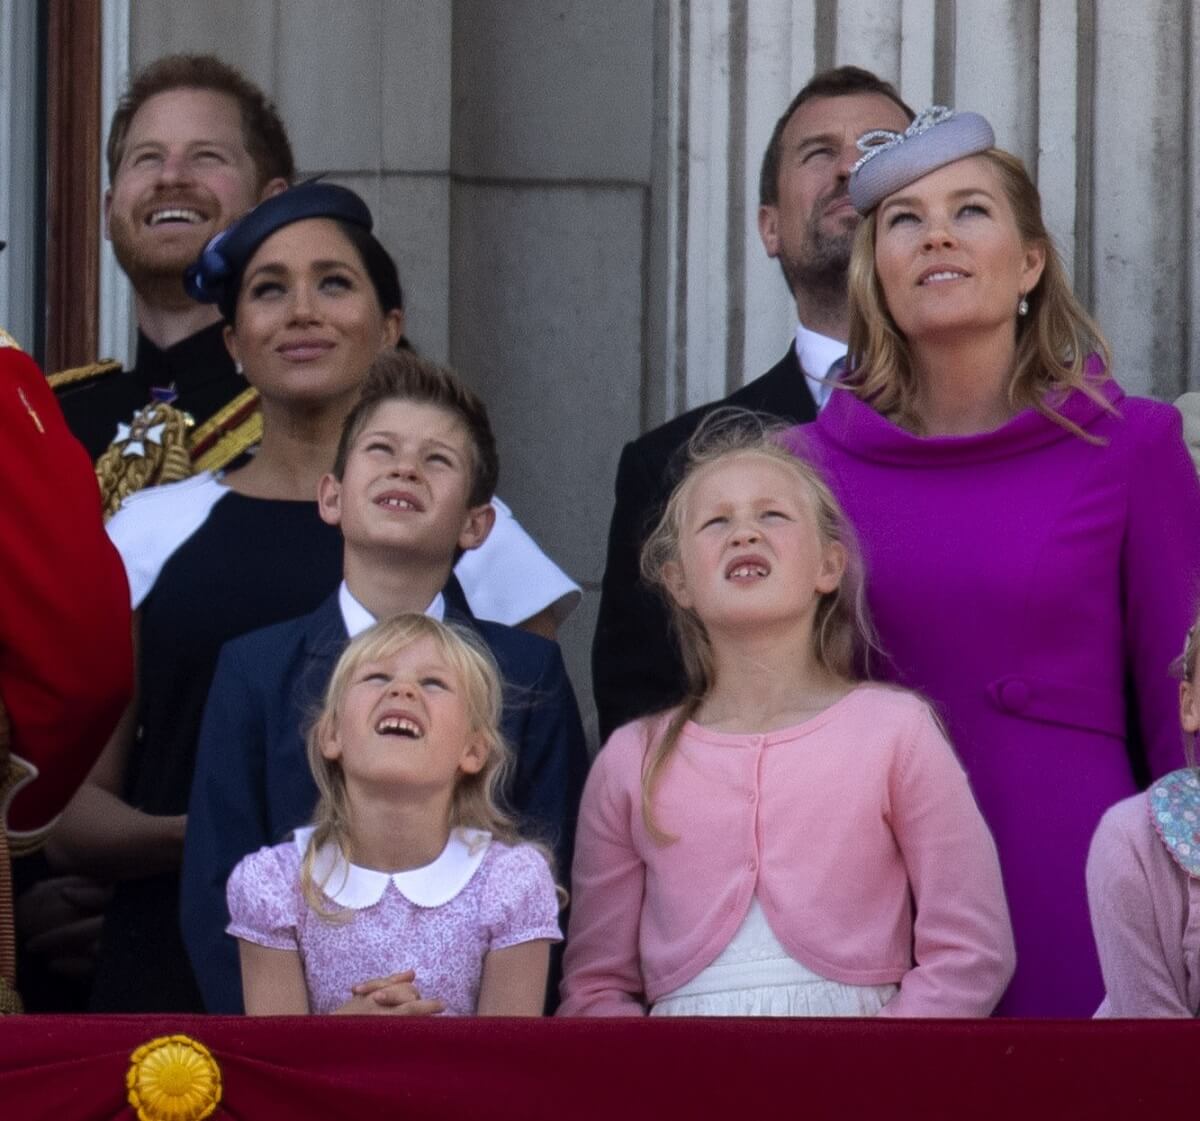 Members of the royal family on the balcony of Buckingham Palace watching a flypast